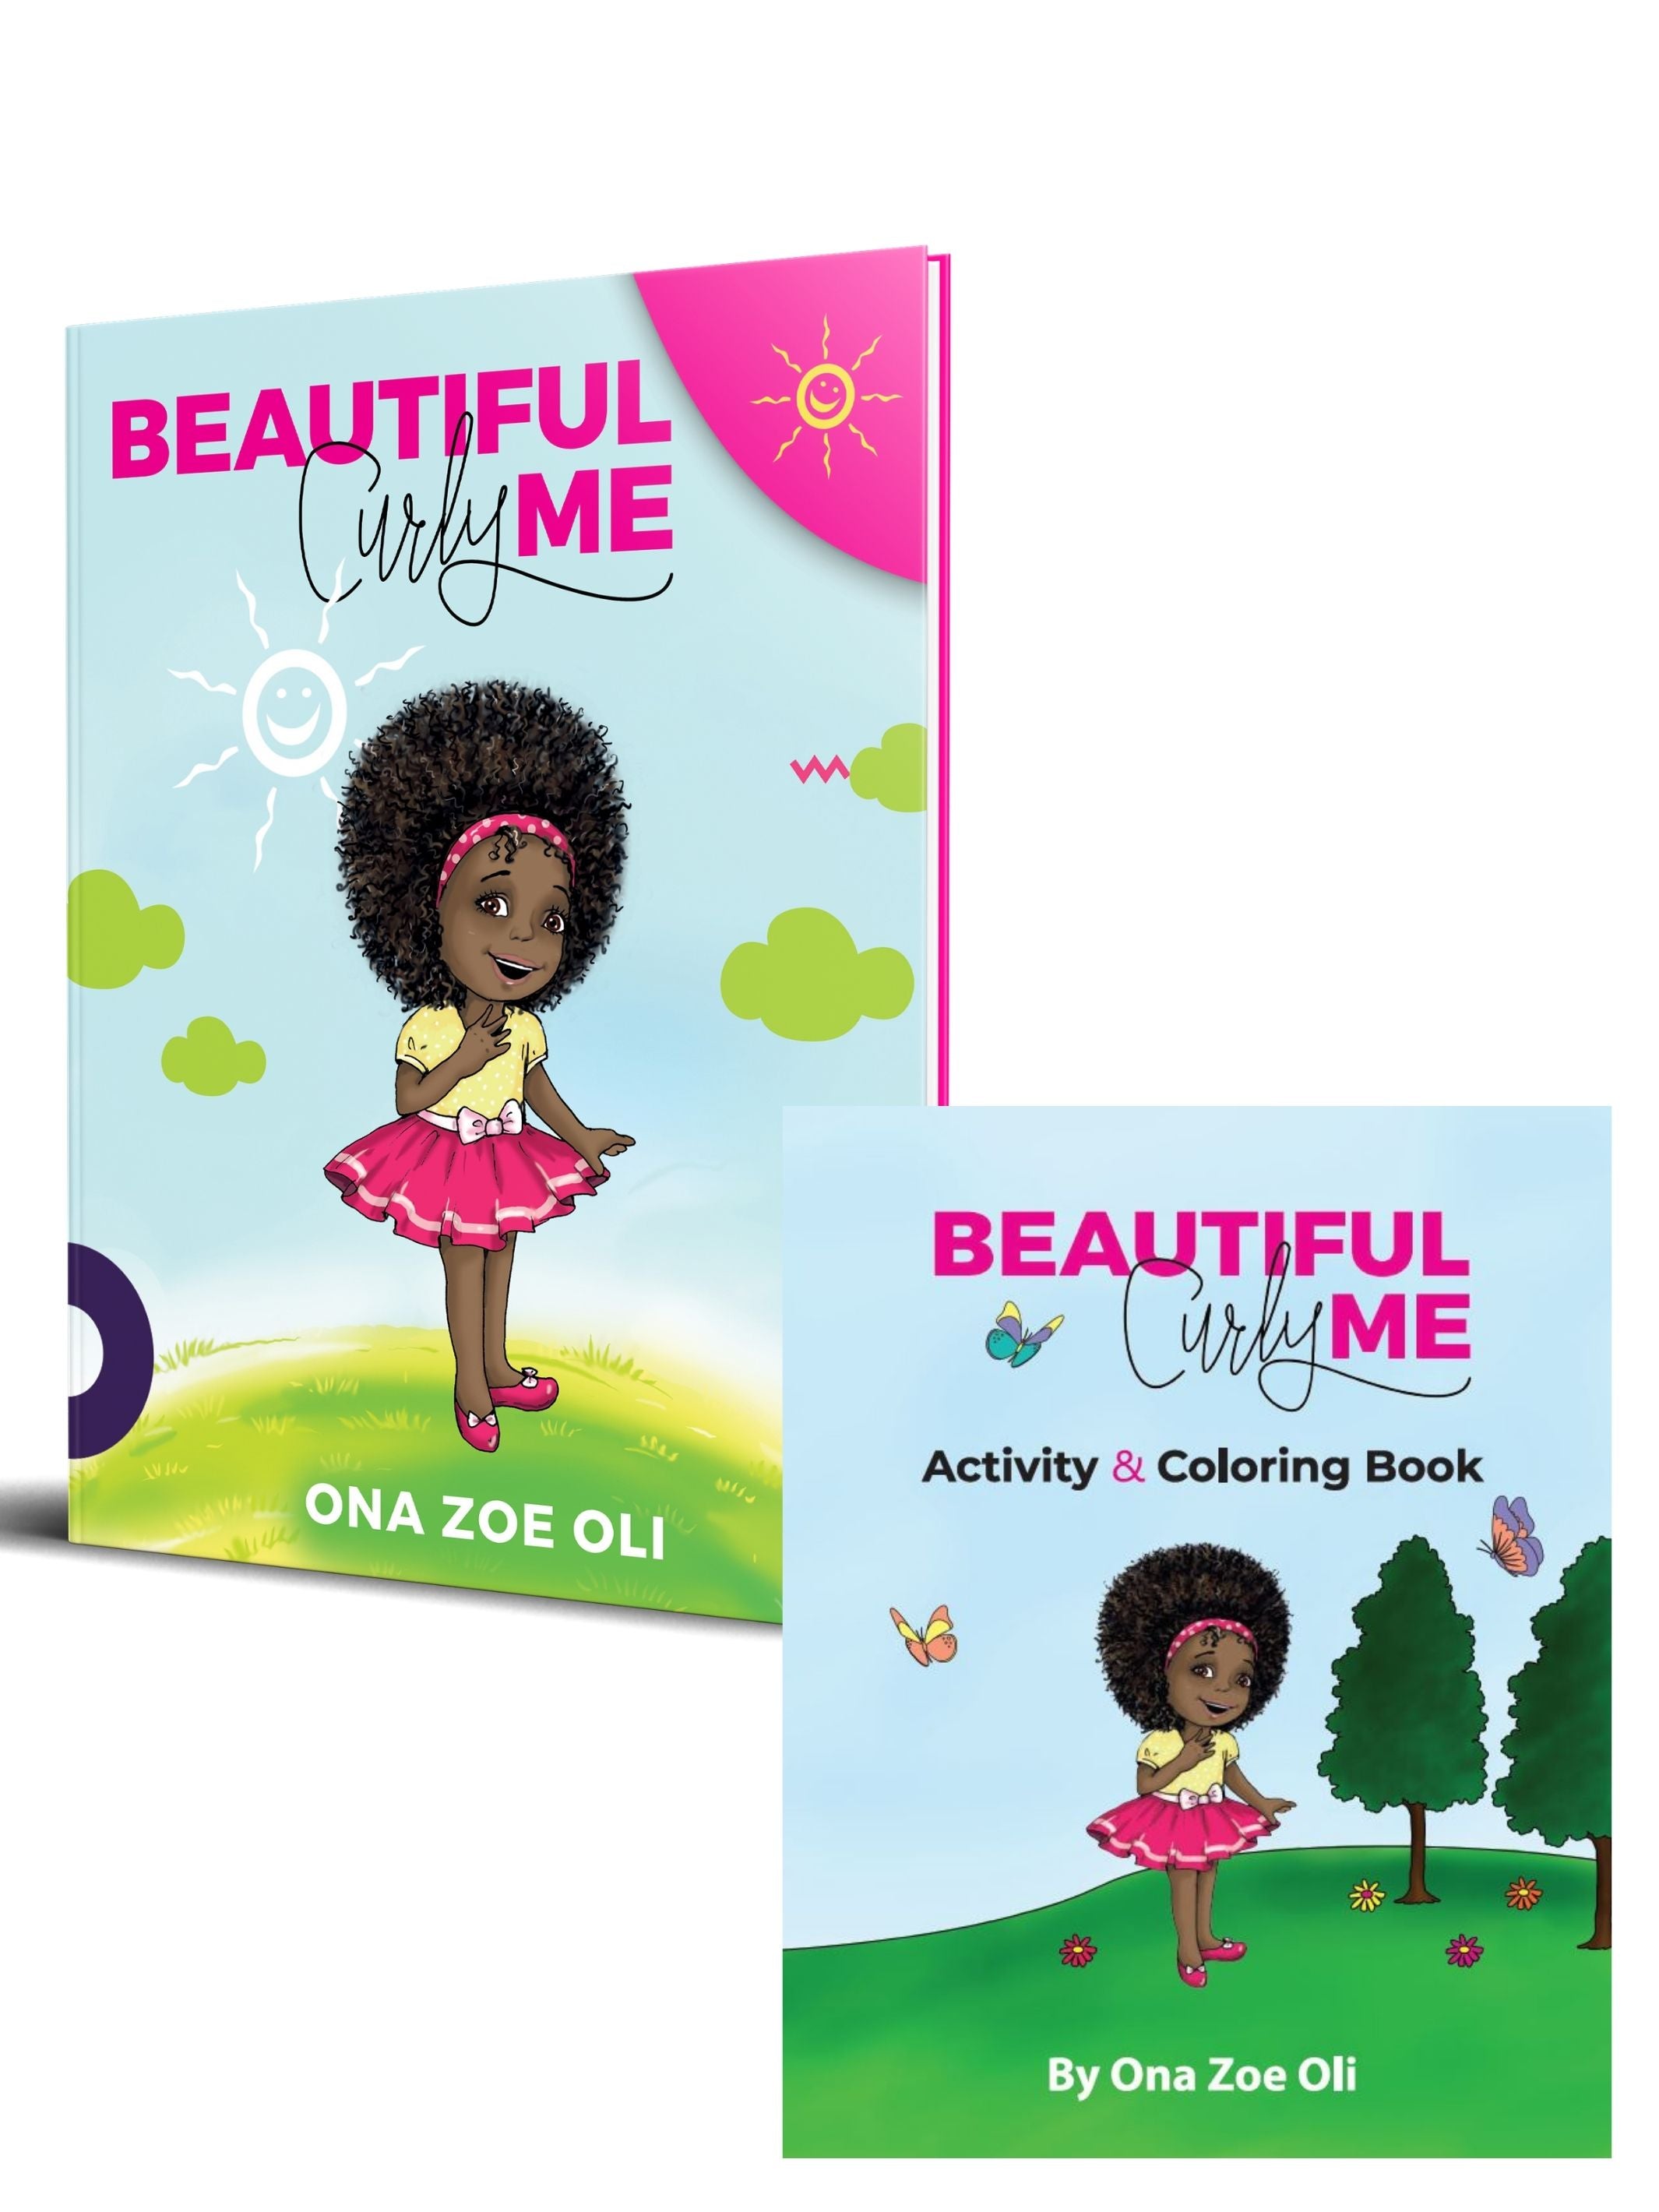 Beautiful Curly Me Book And Coloring Book Set